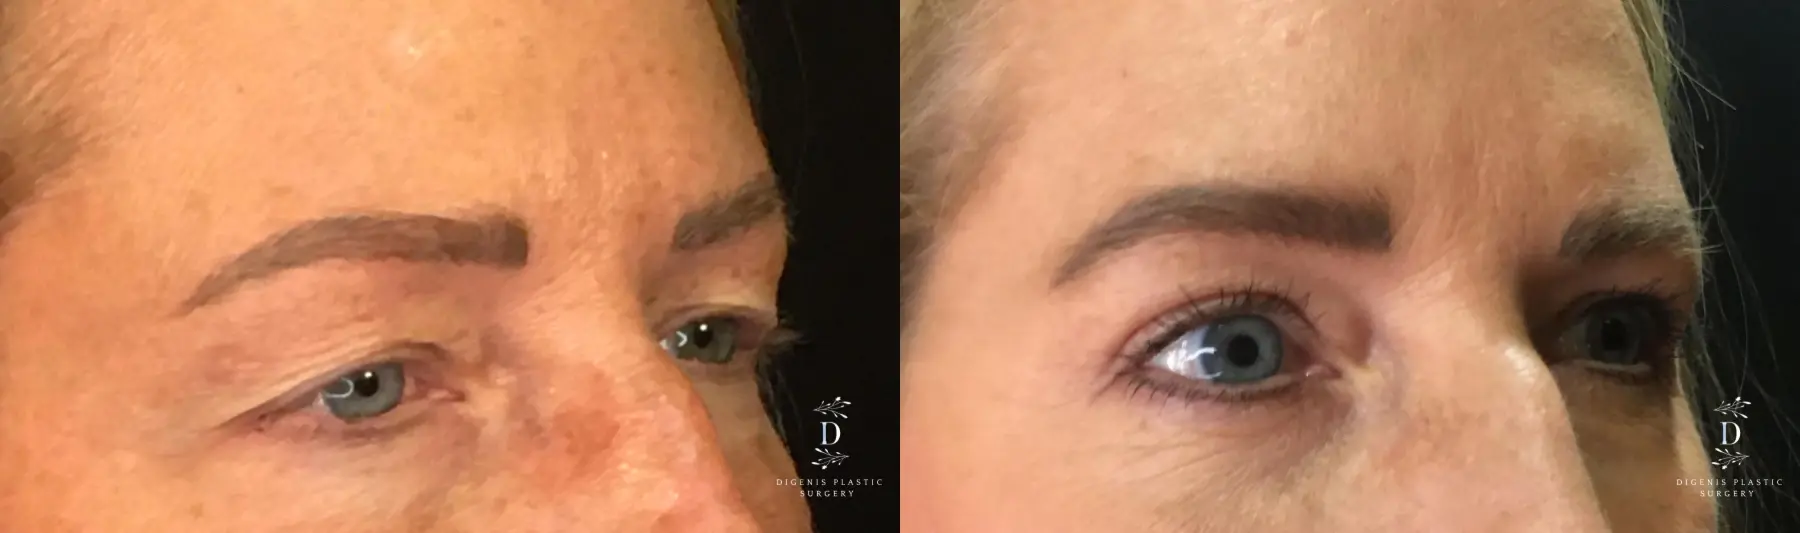 Eyelid Surgery: Patient 13 - Before and After 2